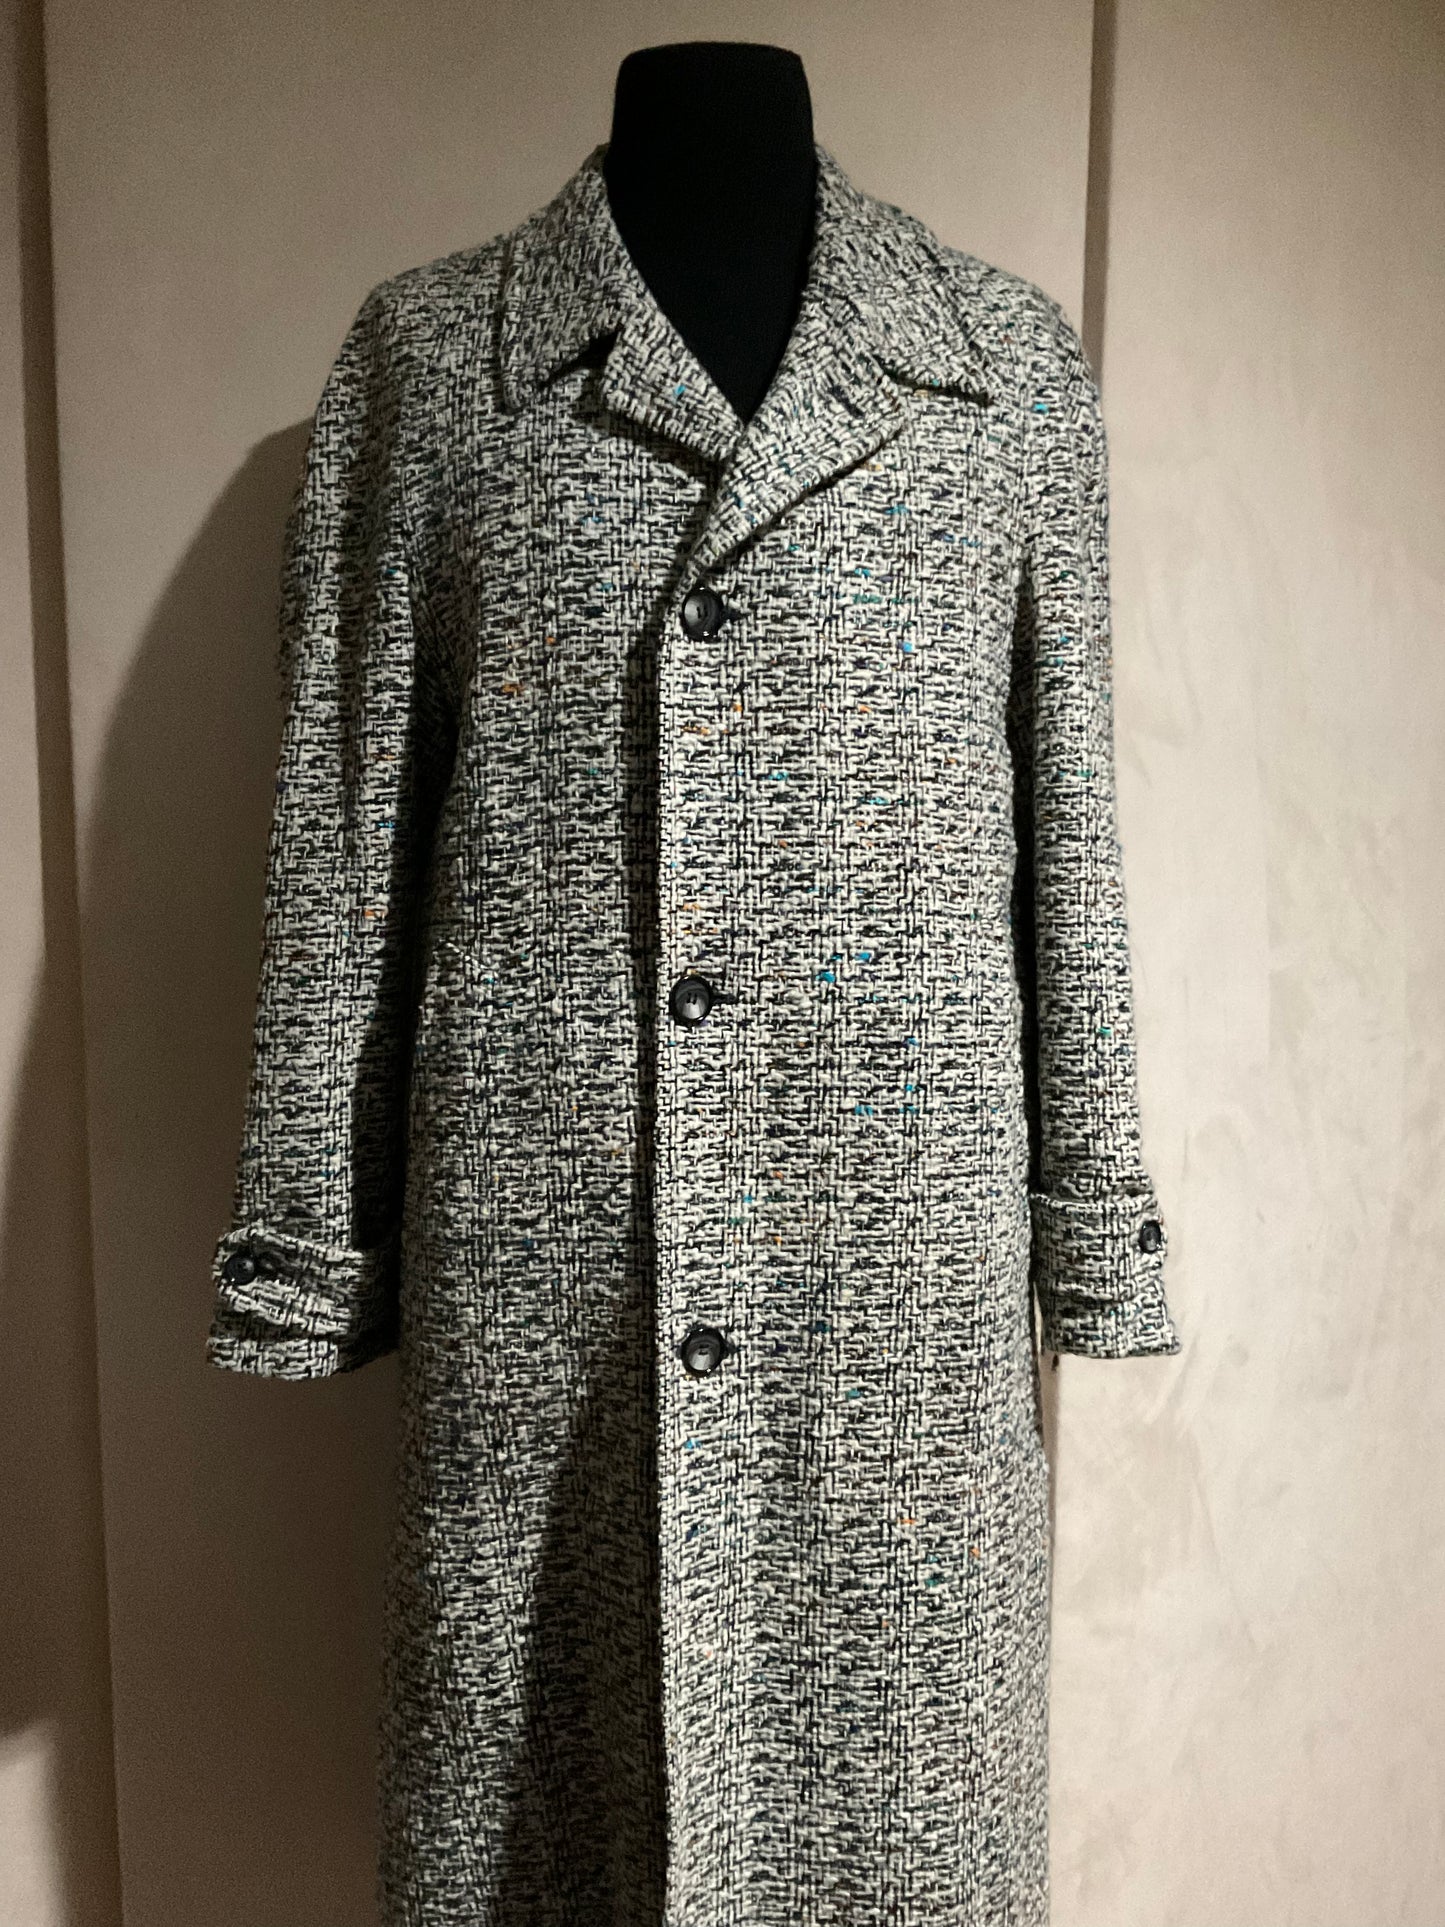 R P OVERCOAT / MULTI COLOR VINTAGE TWEED / MADE IN ENGLAND / NEW / 40 / 42